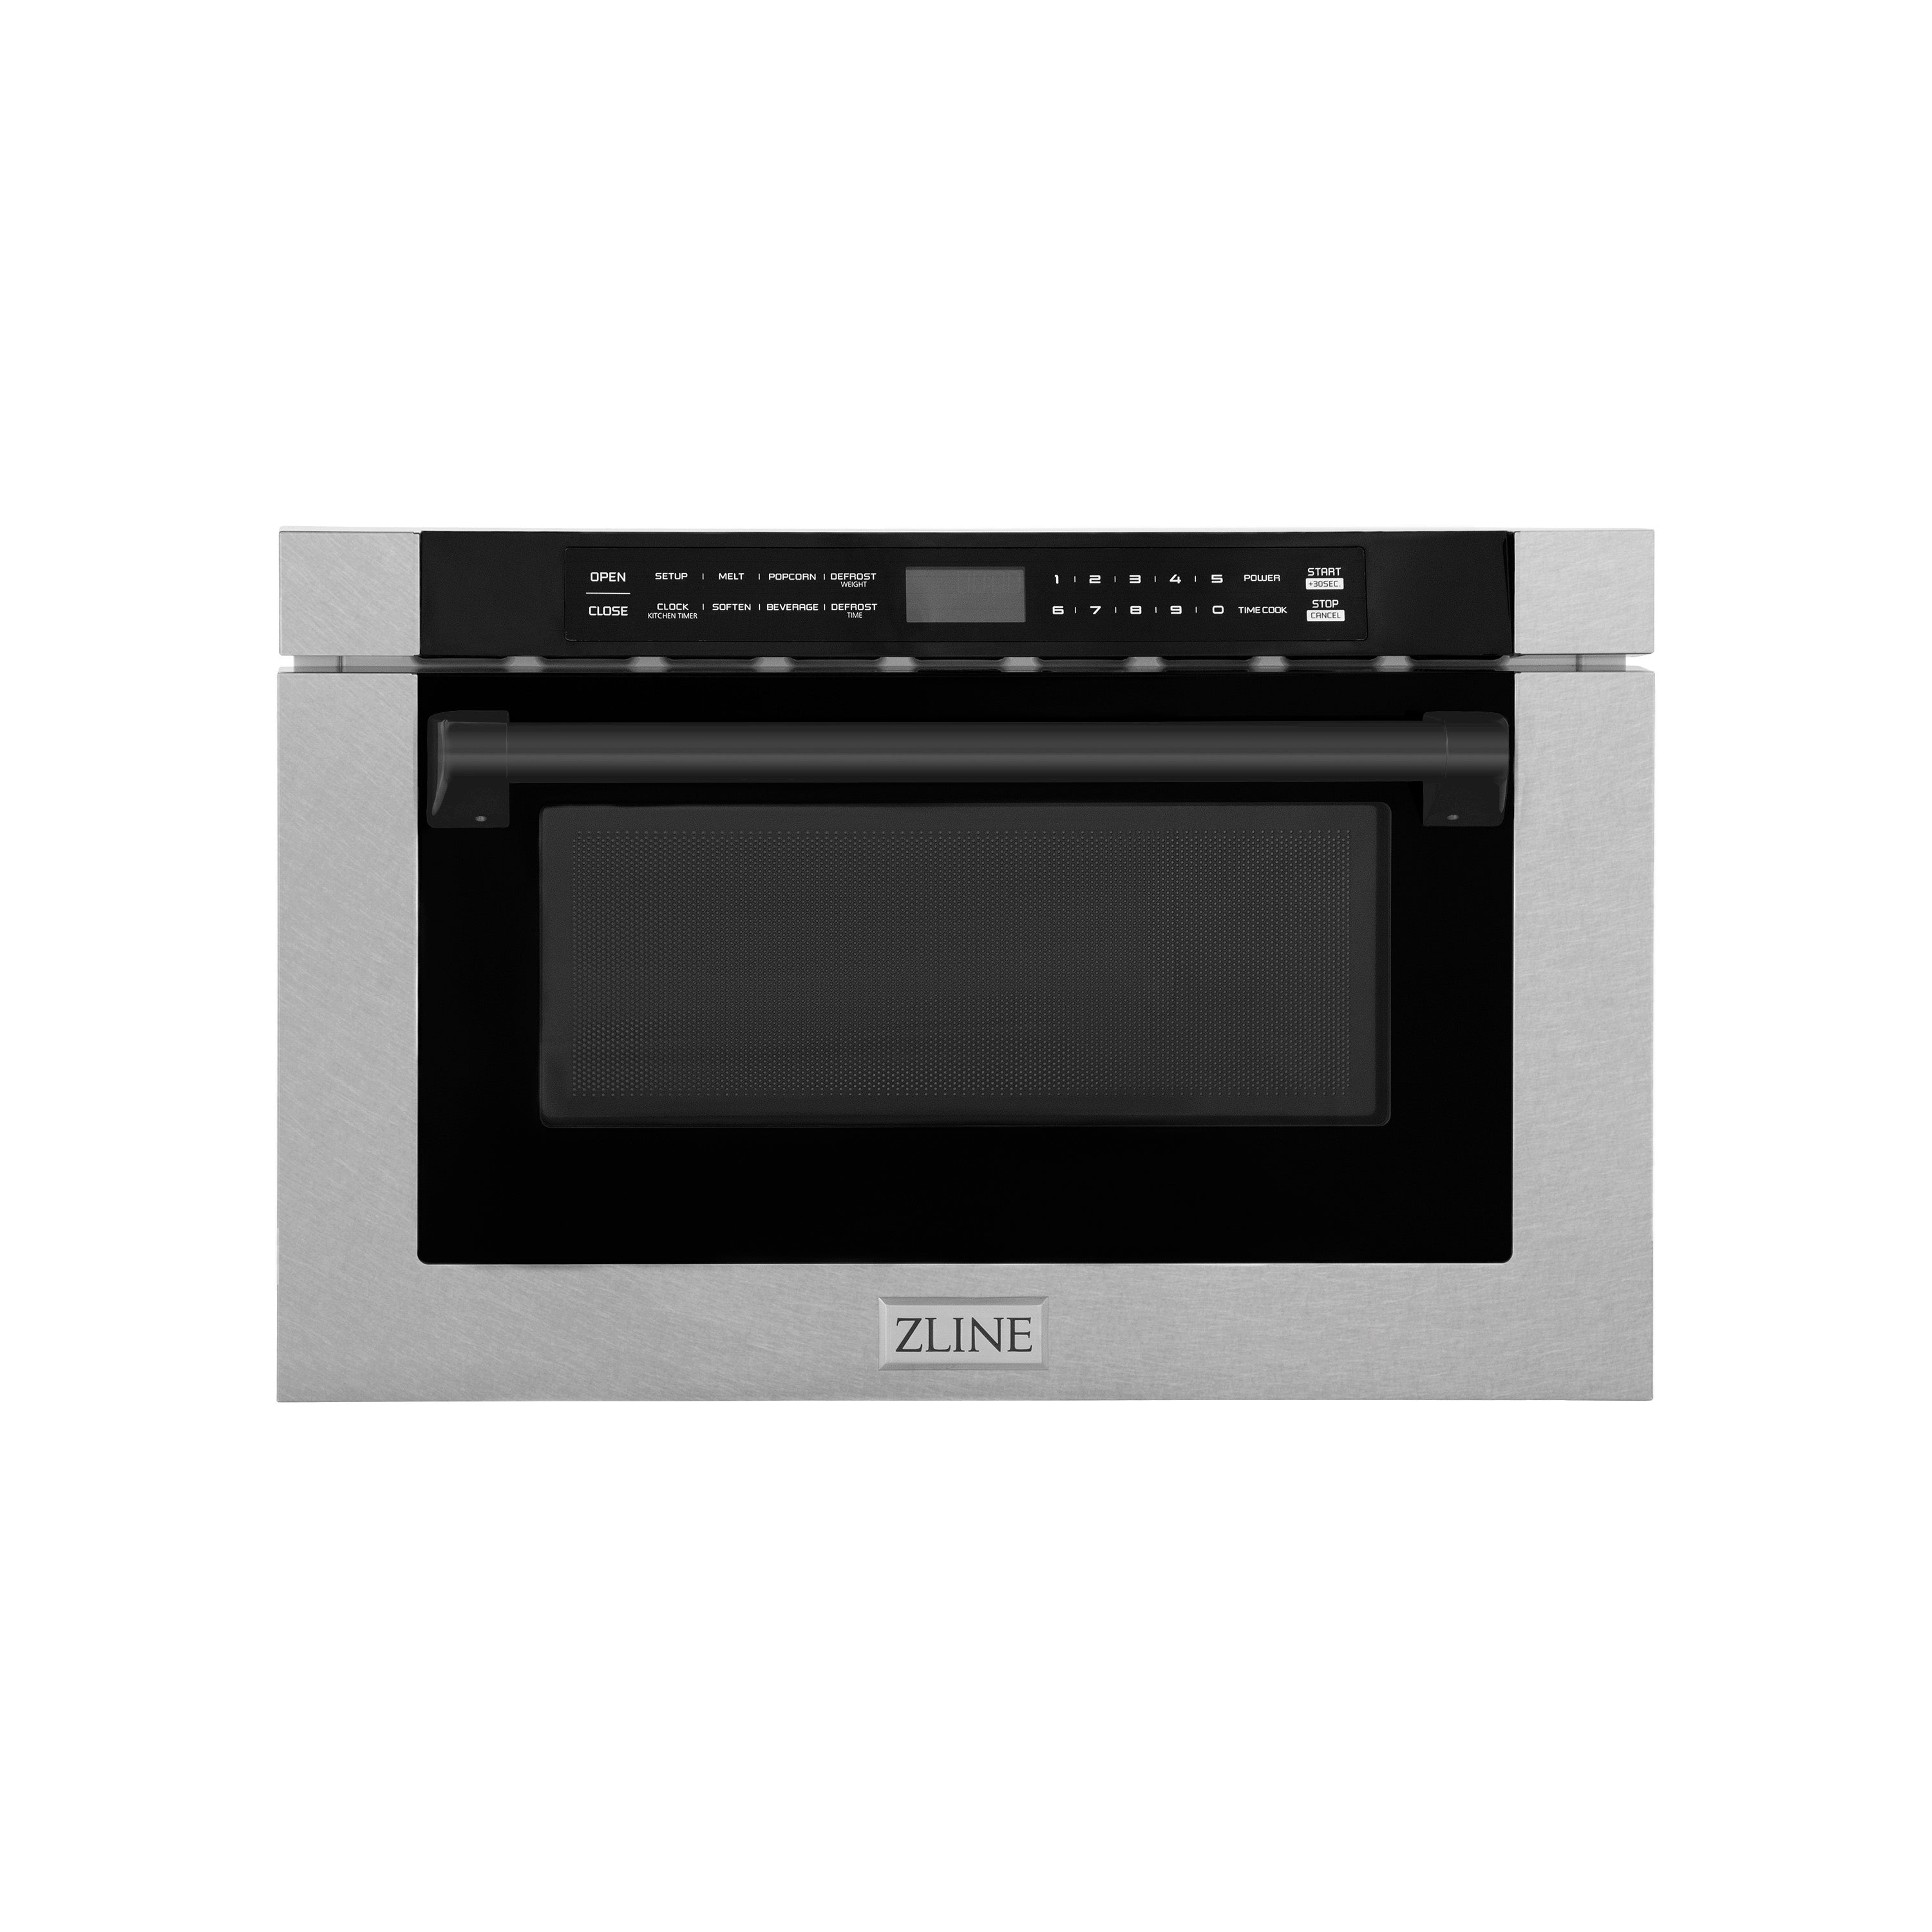 ZLINE Autograph Edition 24" 1.2 cu. ft. Built-in Microwave Drawer with a Traditional Handle in Fingerprint Resistant Stainless Steel and Matte Black Accents